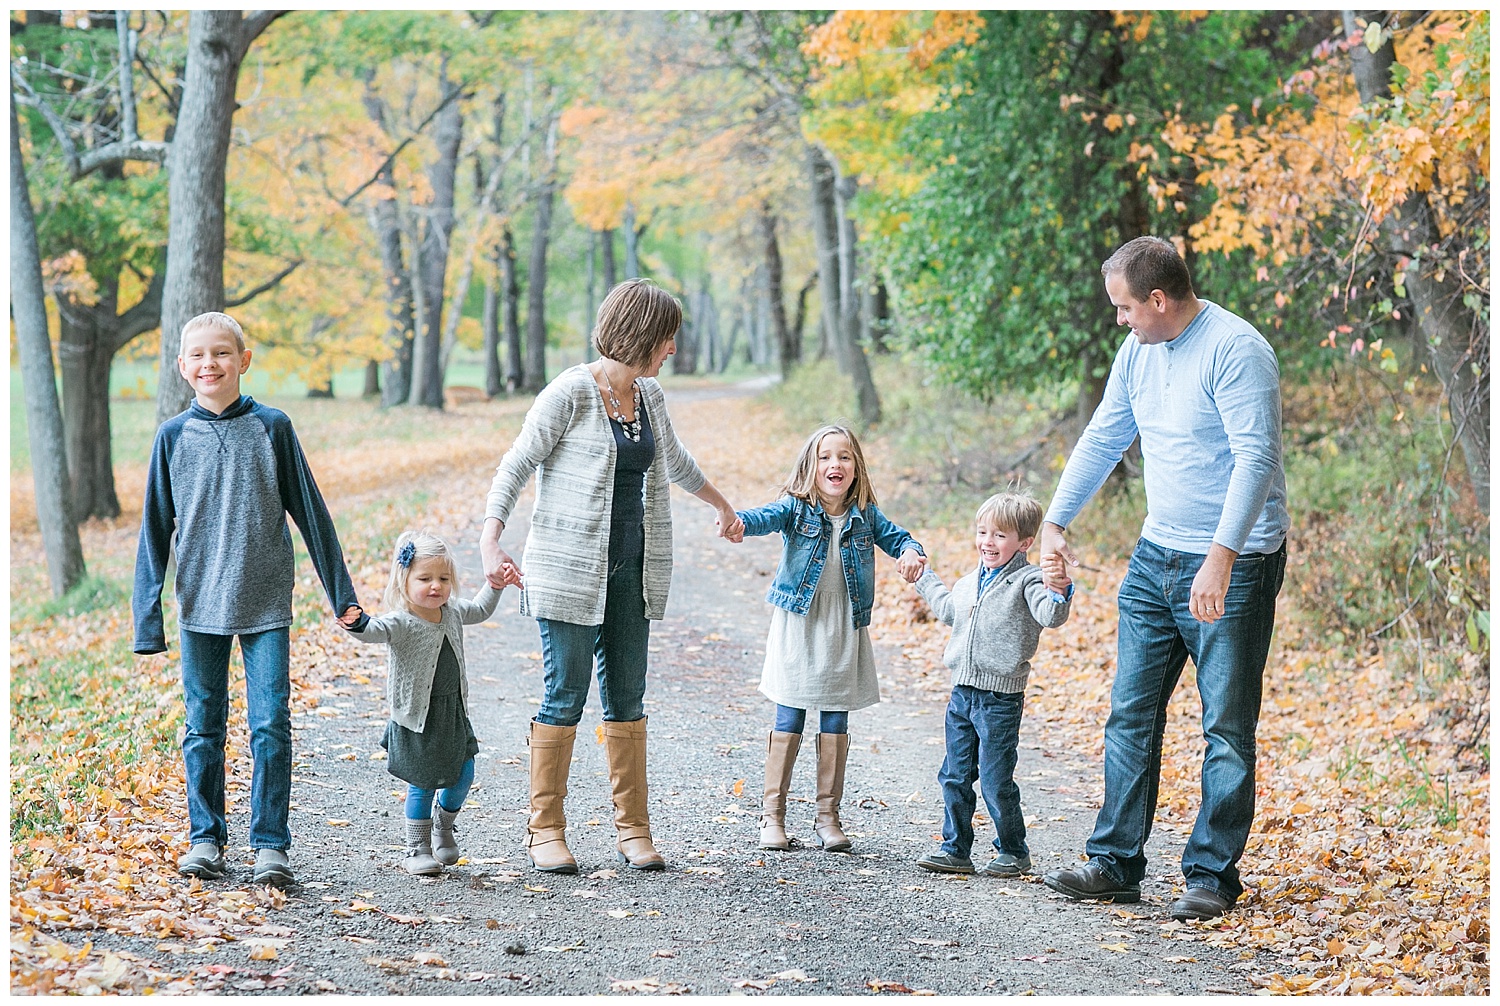 The Schurr family session at Letchworth state park - Whimsy roots photography 39.jpg